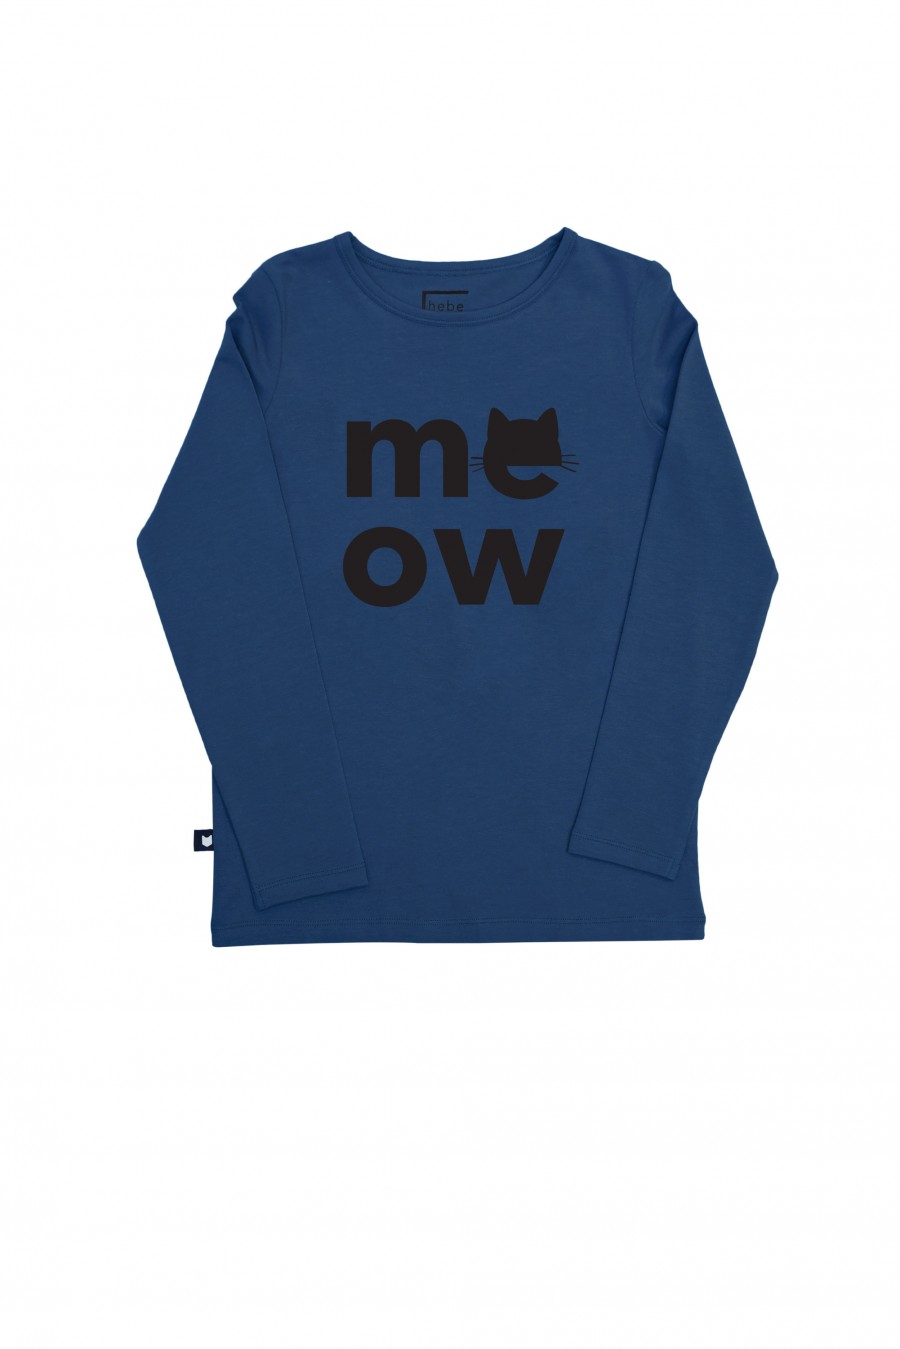 Blue top with meow FW18050